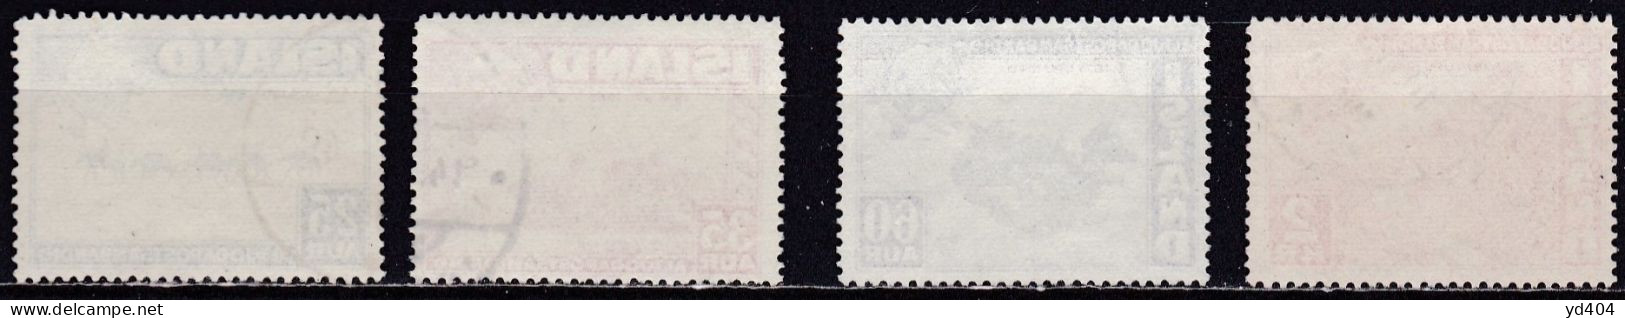 IS050 – ISLANDE – ICELAND – 1949 – 75th ANNIVERSARY OF UPU – SG # 292/5 USED 4,25 € - Used Stamps